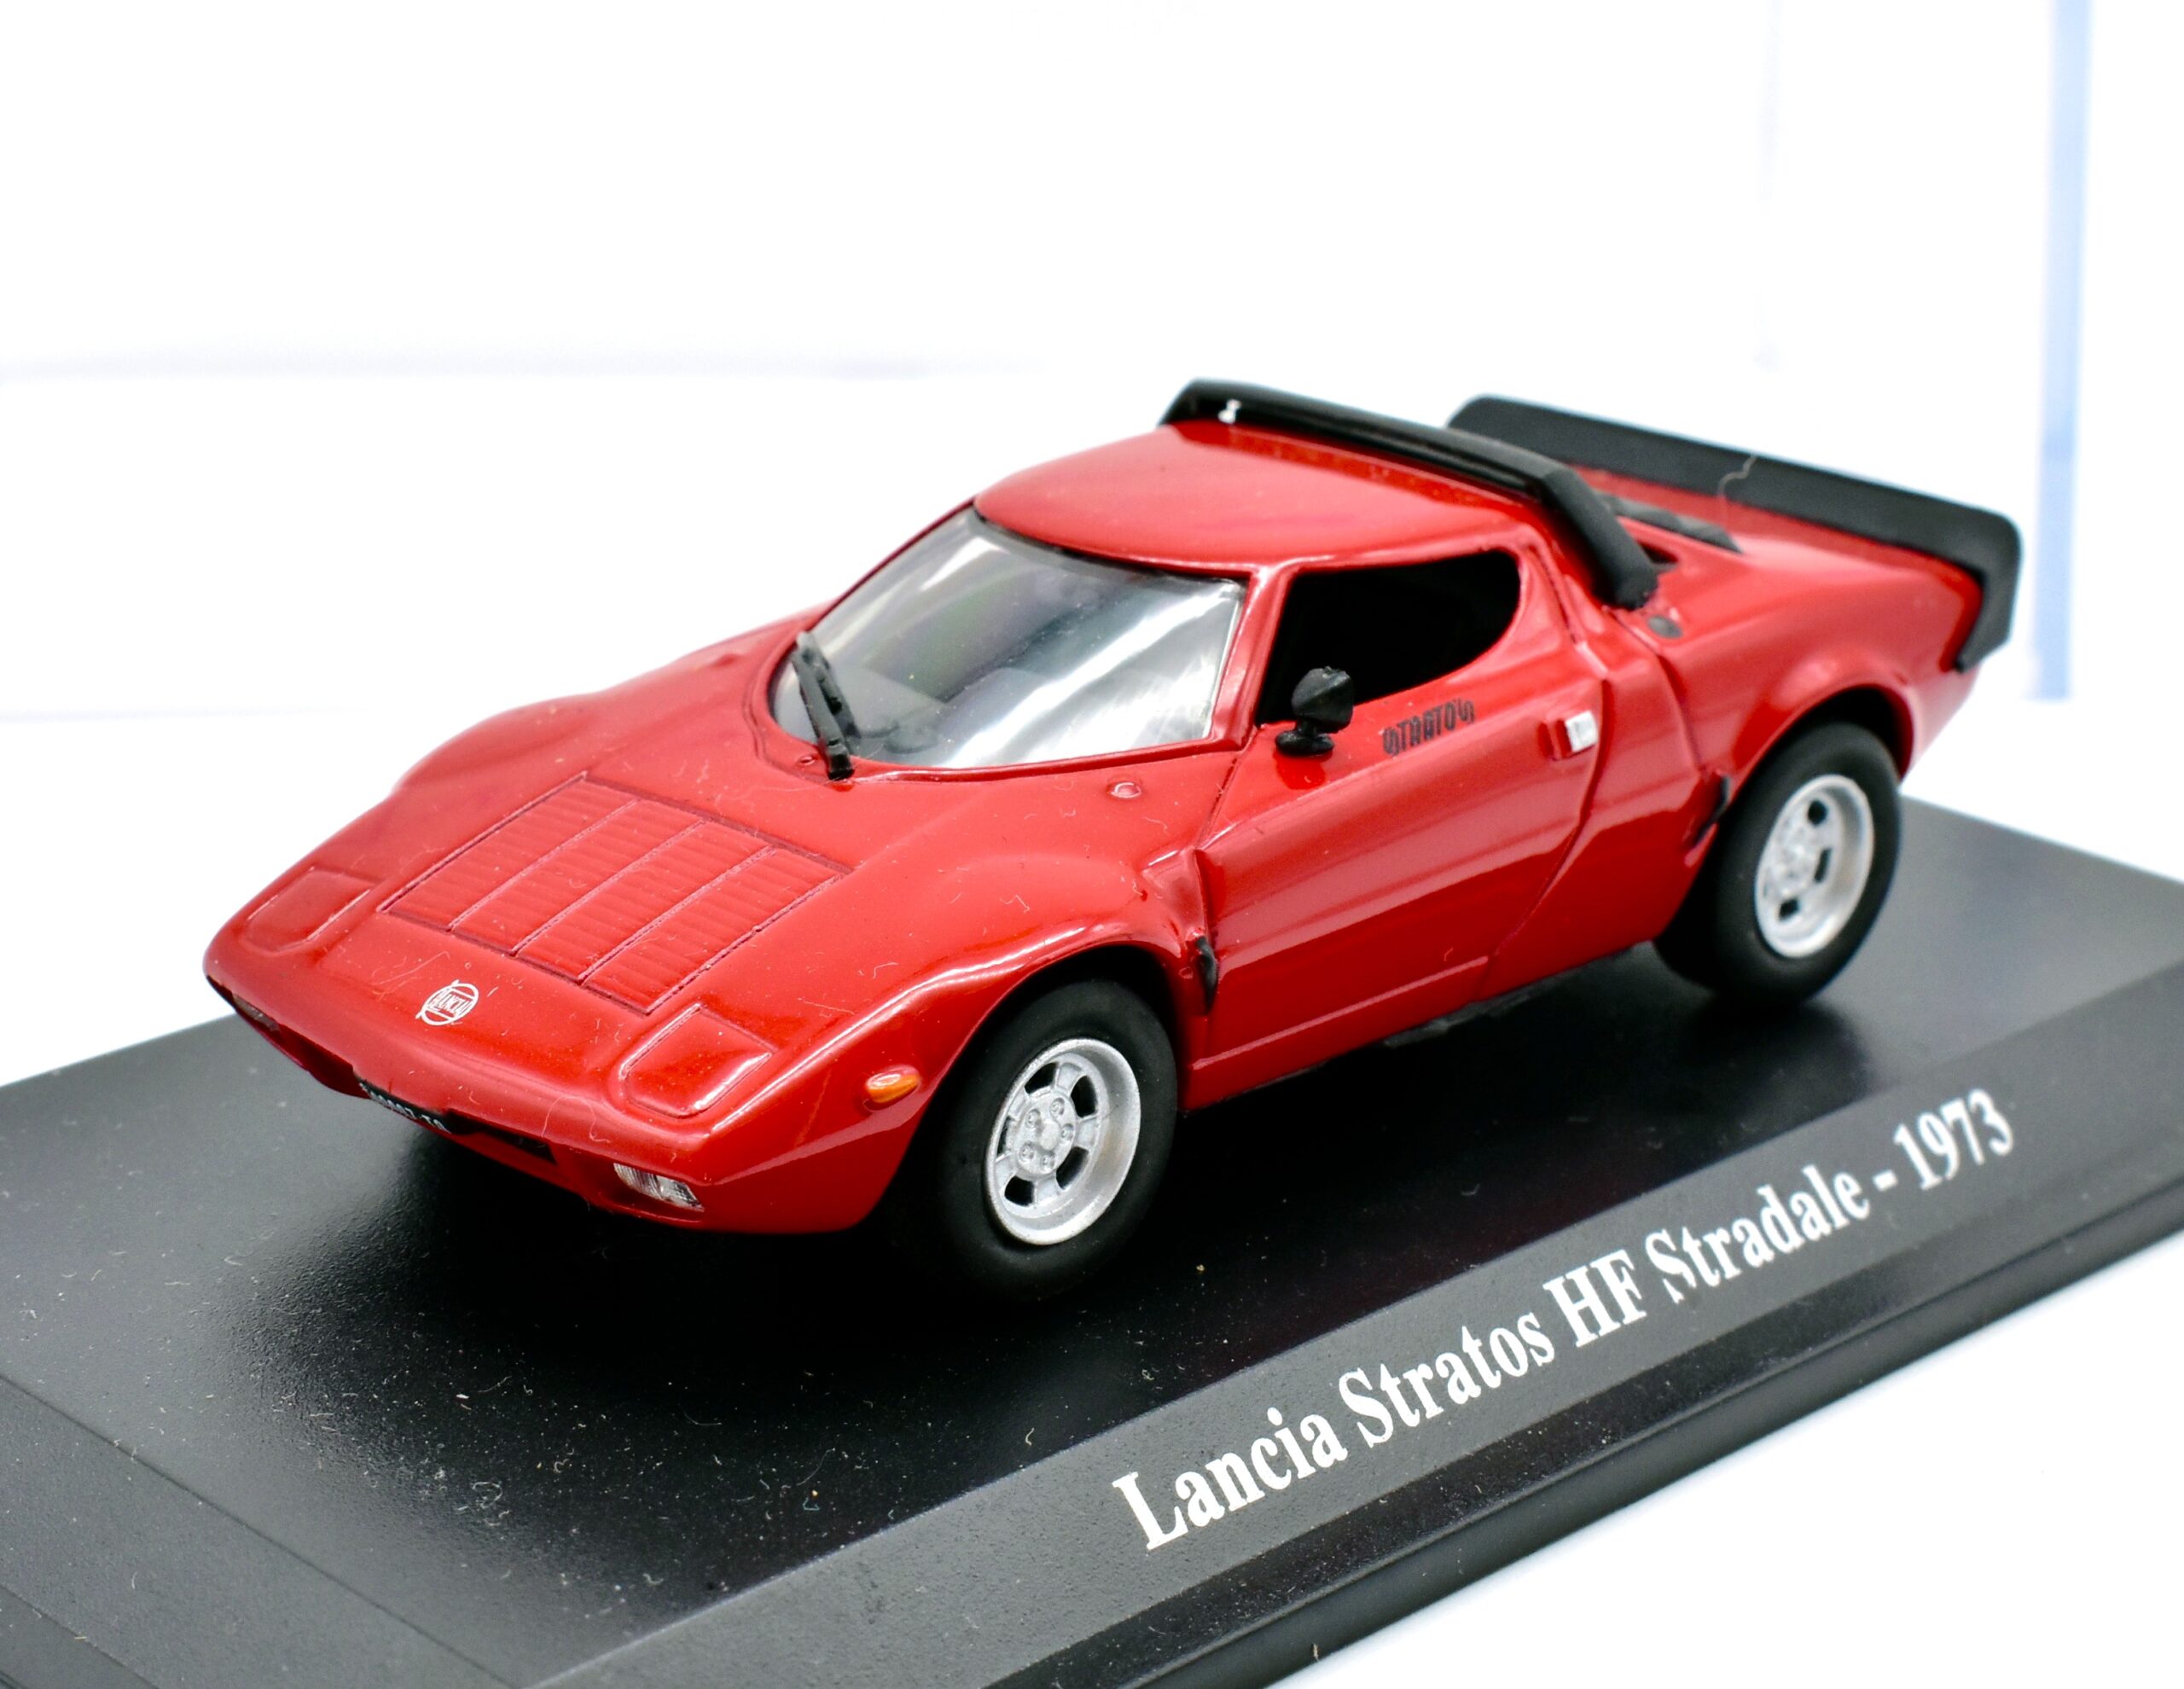 Red lancia Stratos HF model car 1:43 scale norev model car newsstand